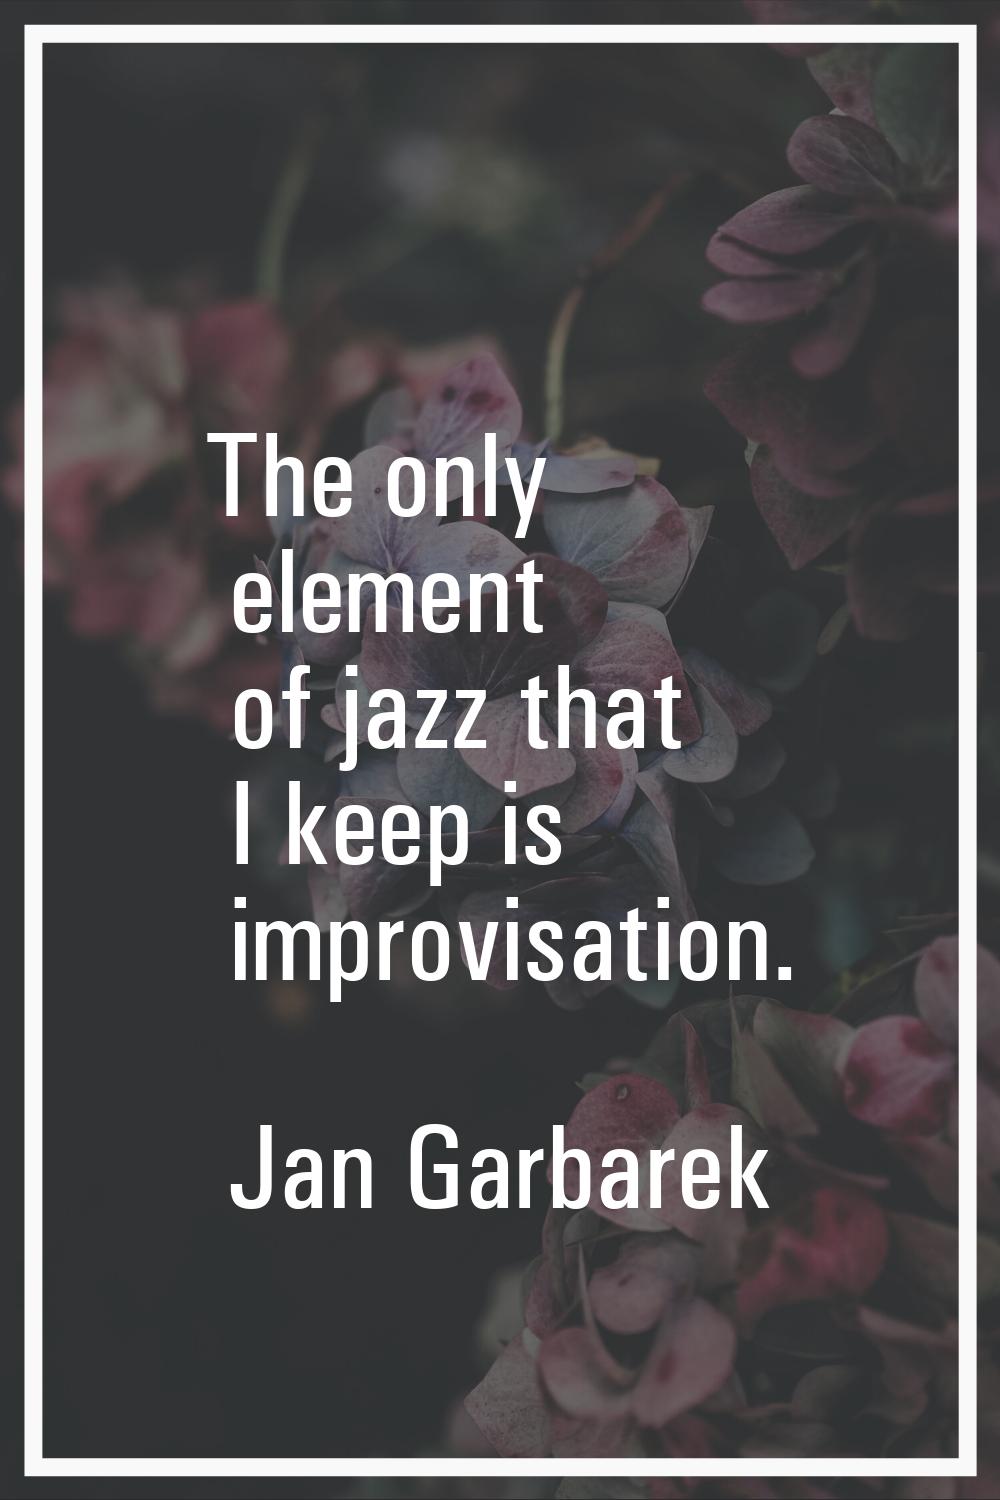 The only element of jazz that I keep is improvisation.